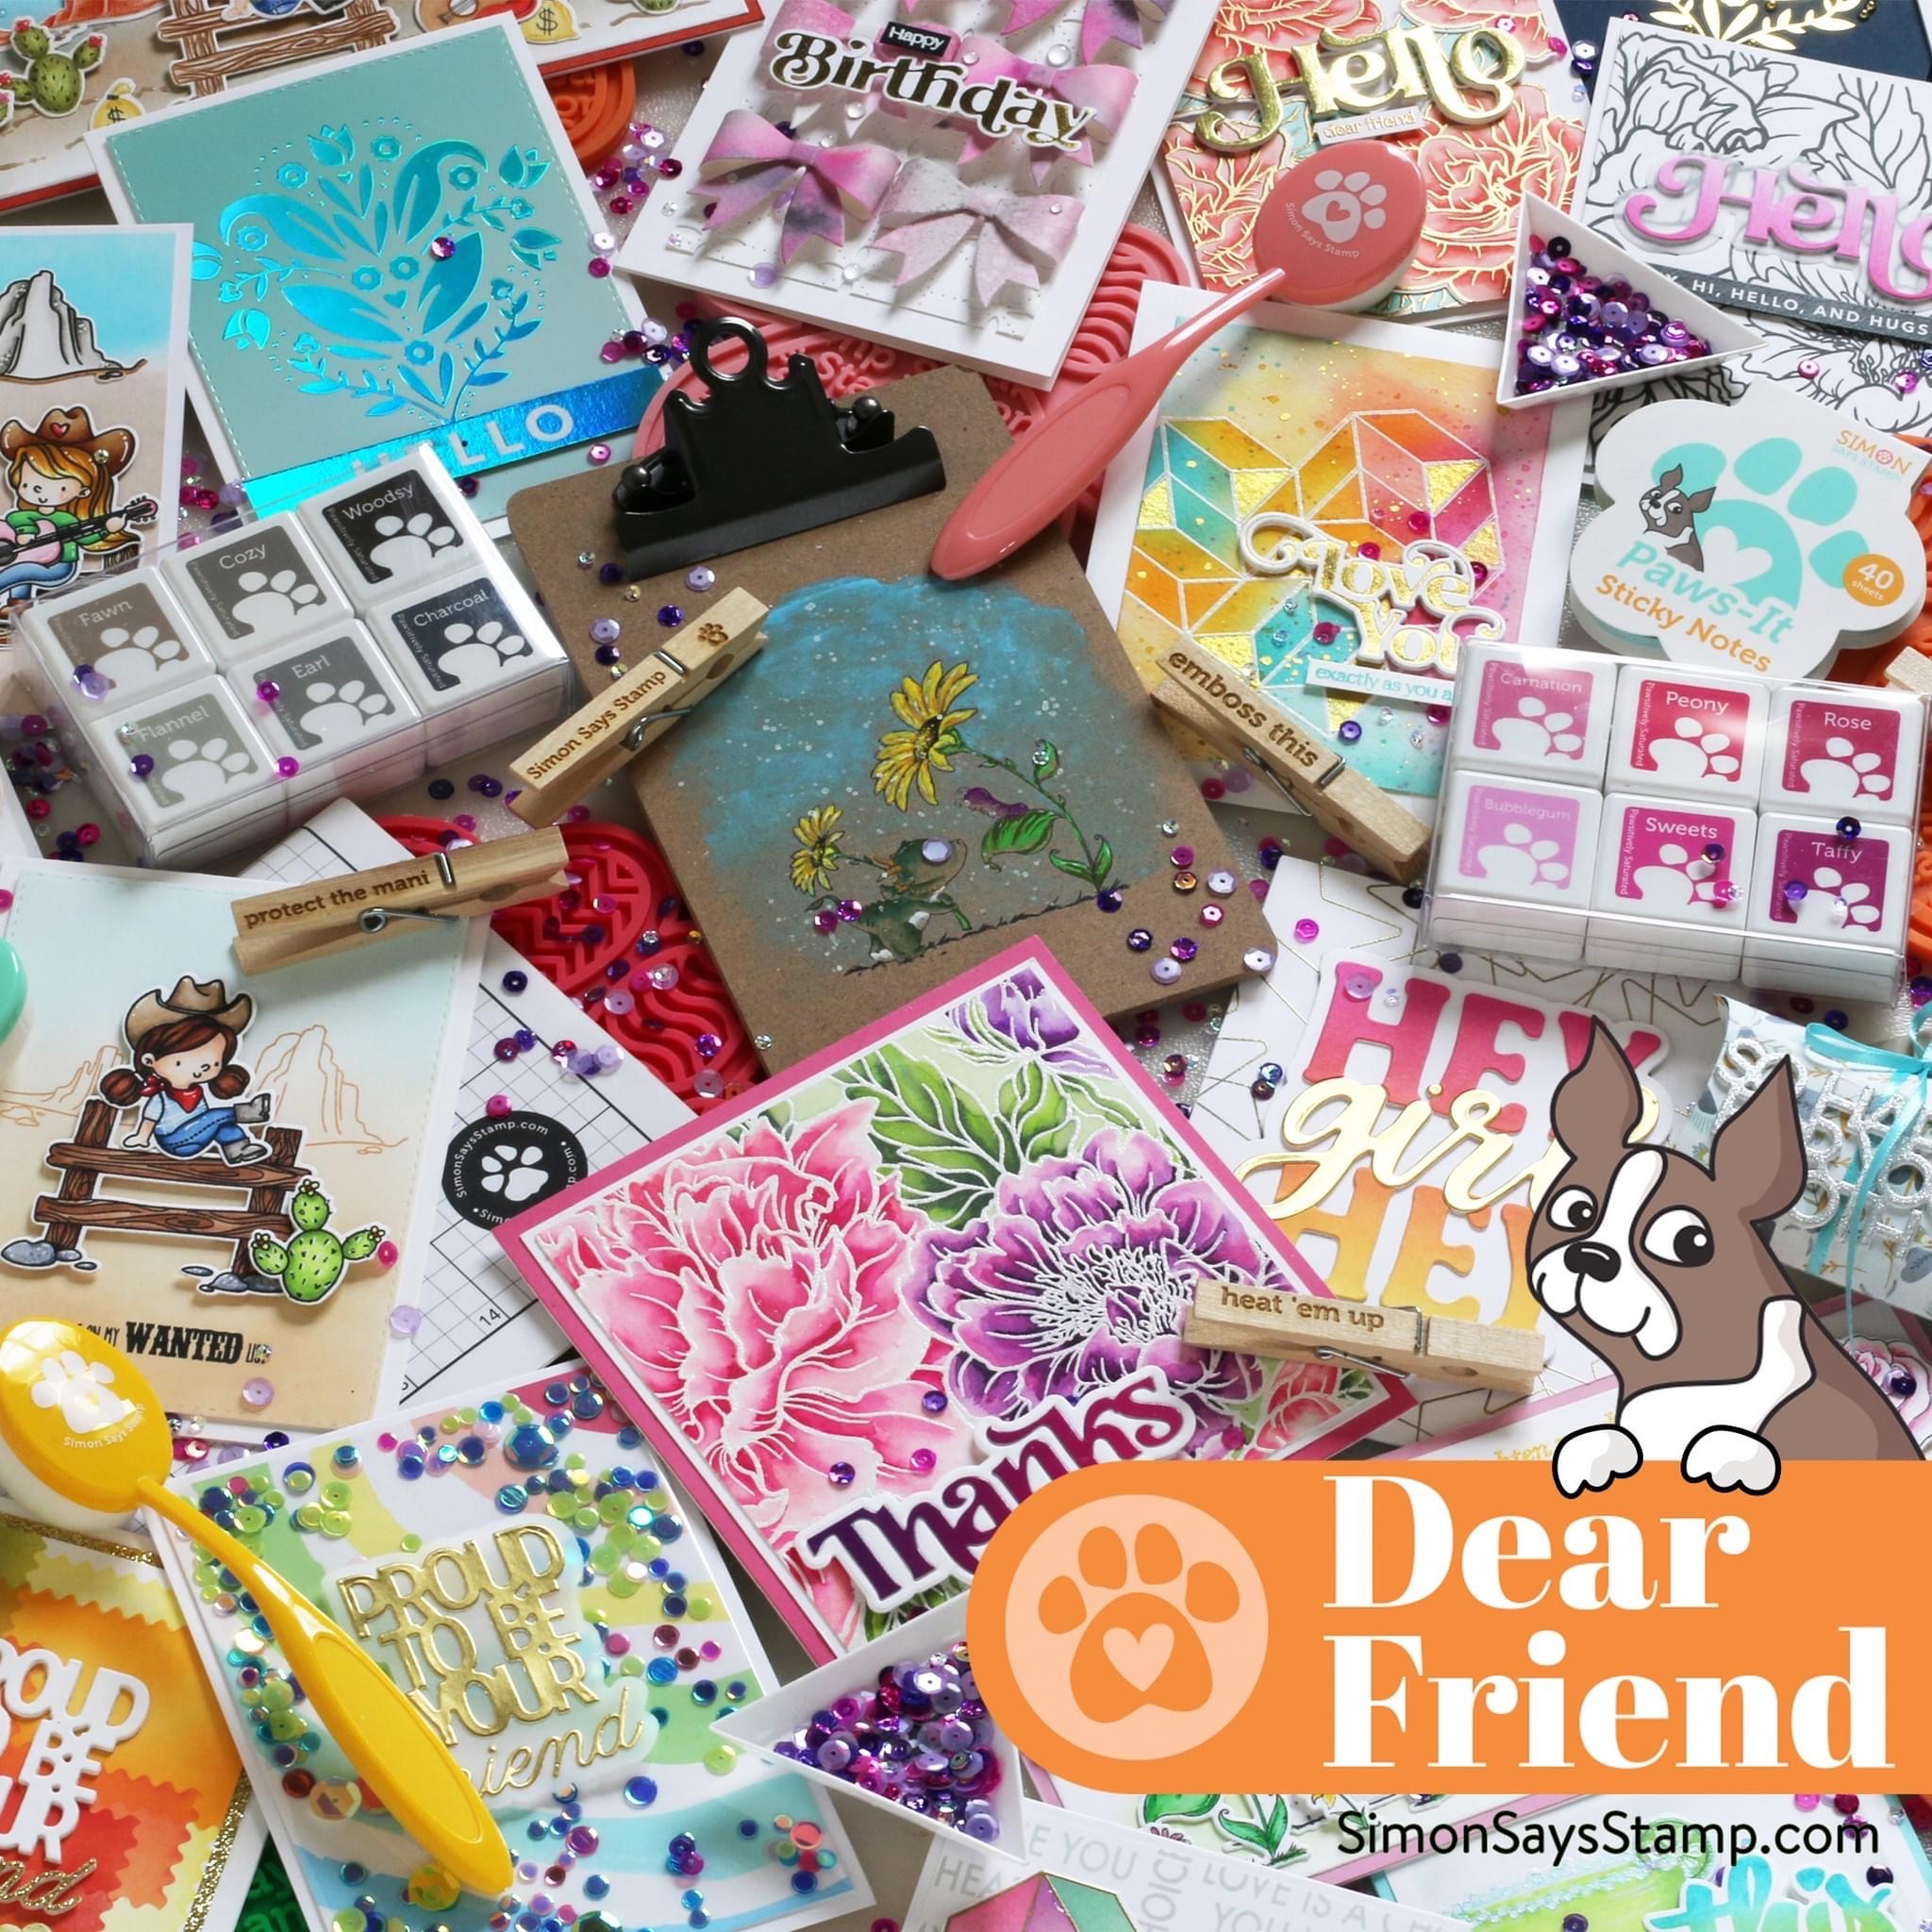 simon says stamp, dear friend, new release, card making